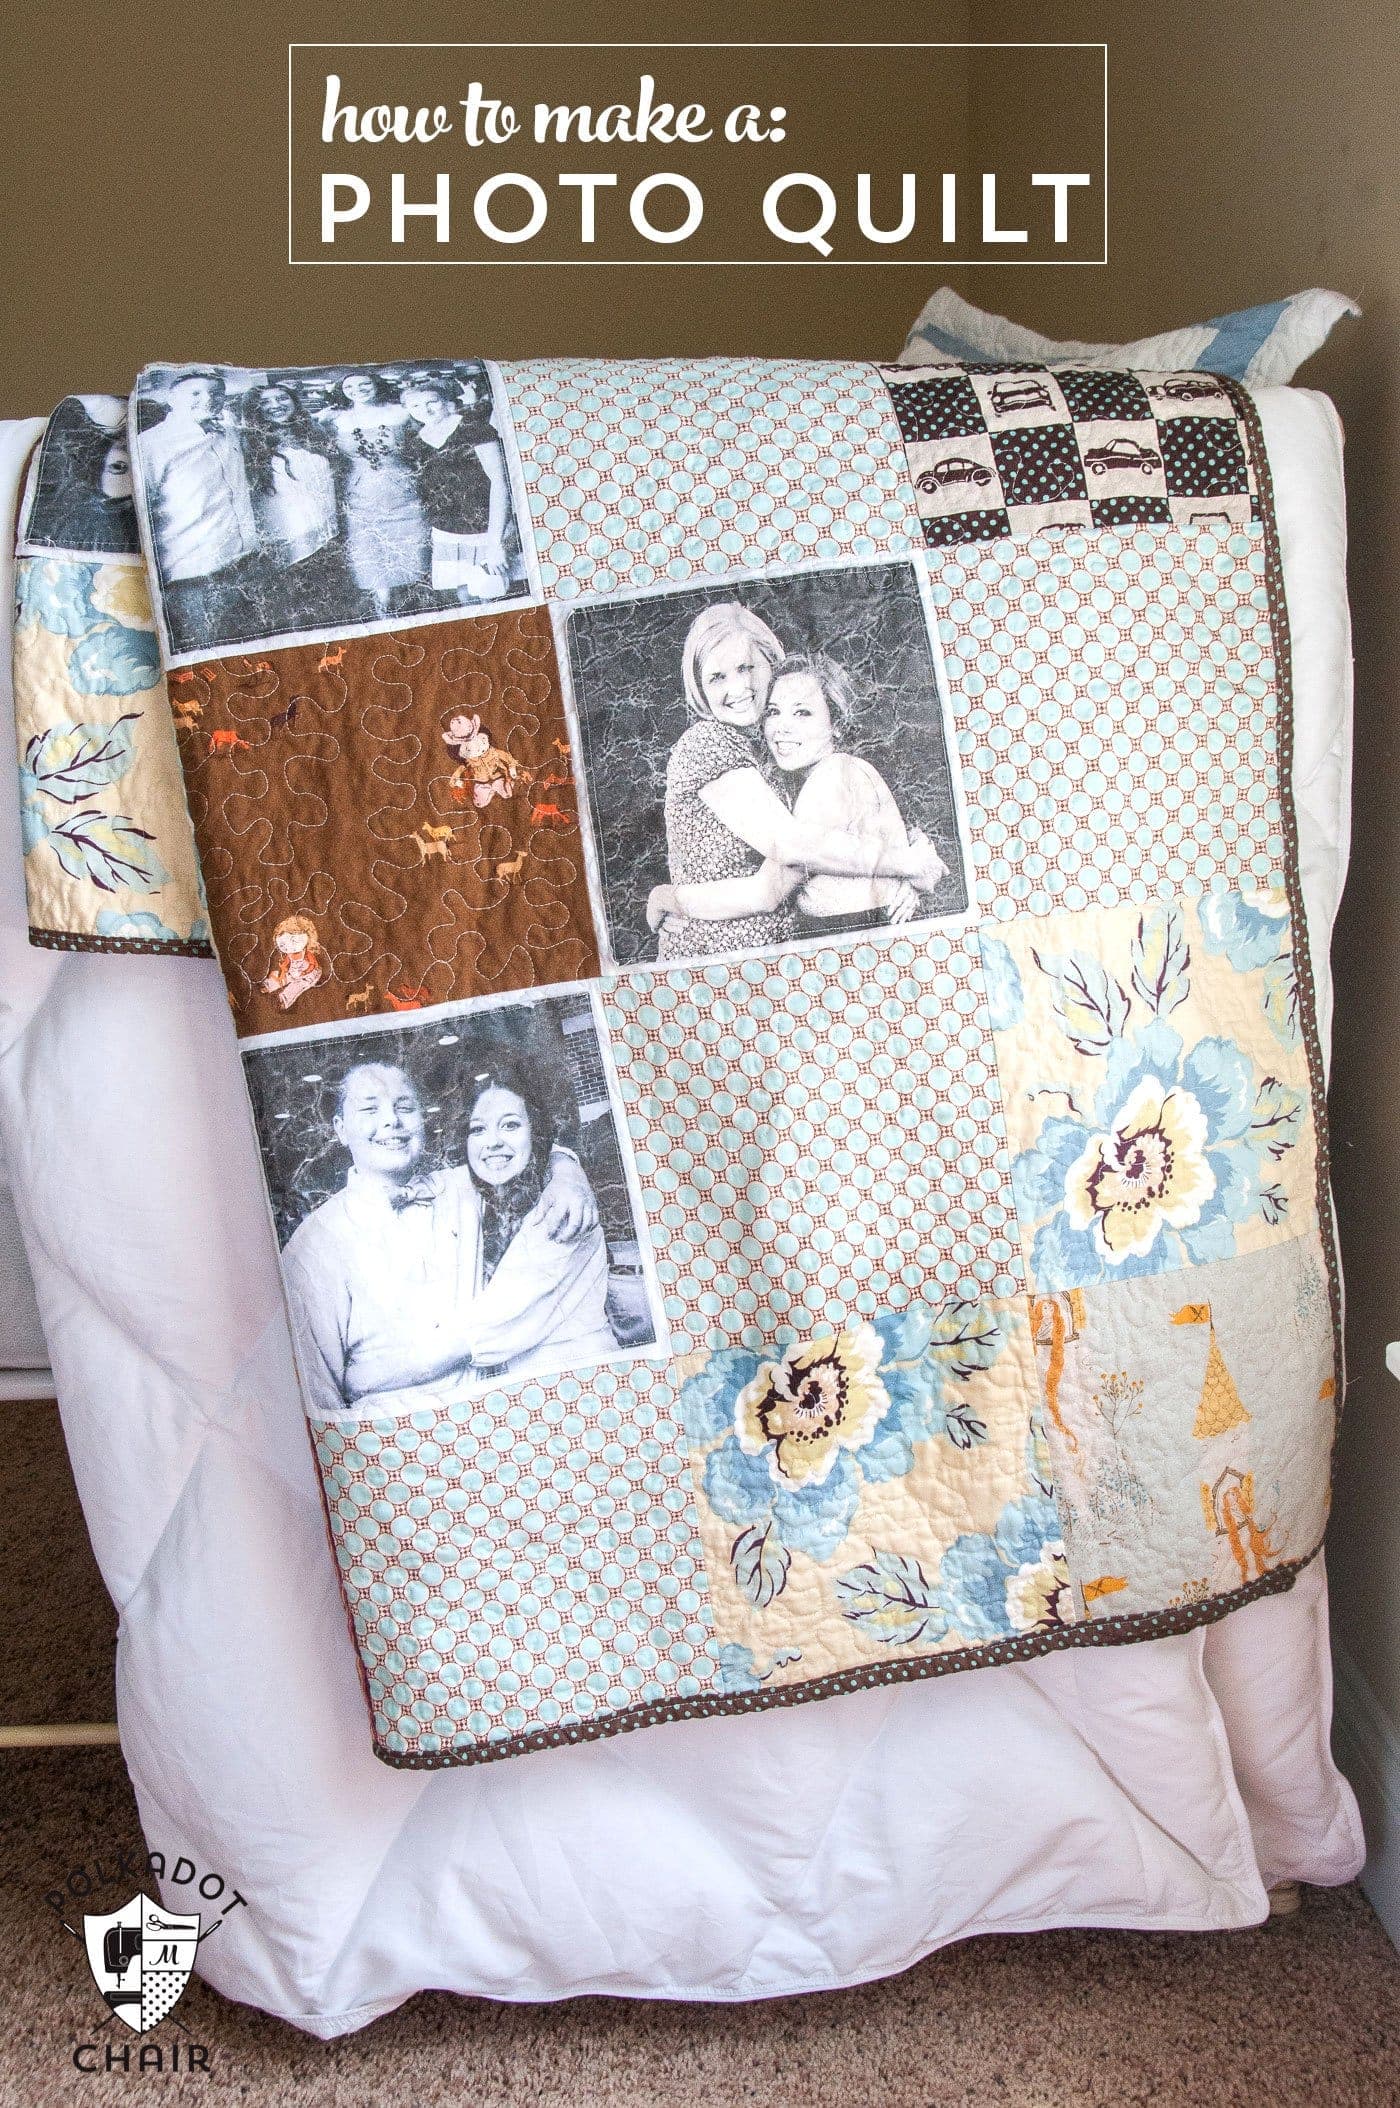 How to Make a Photo Quilt